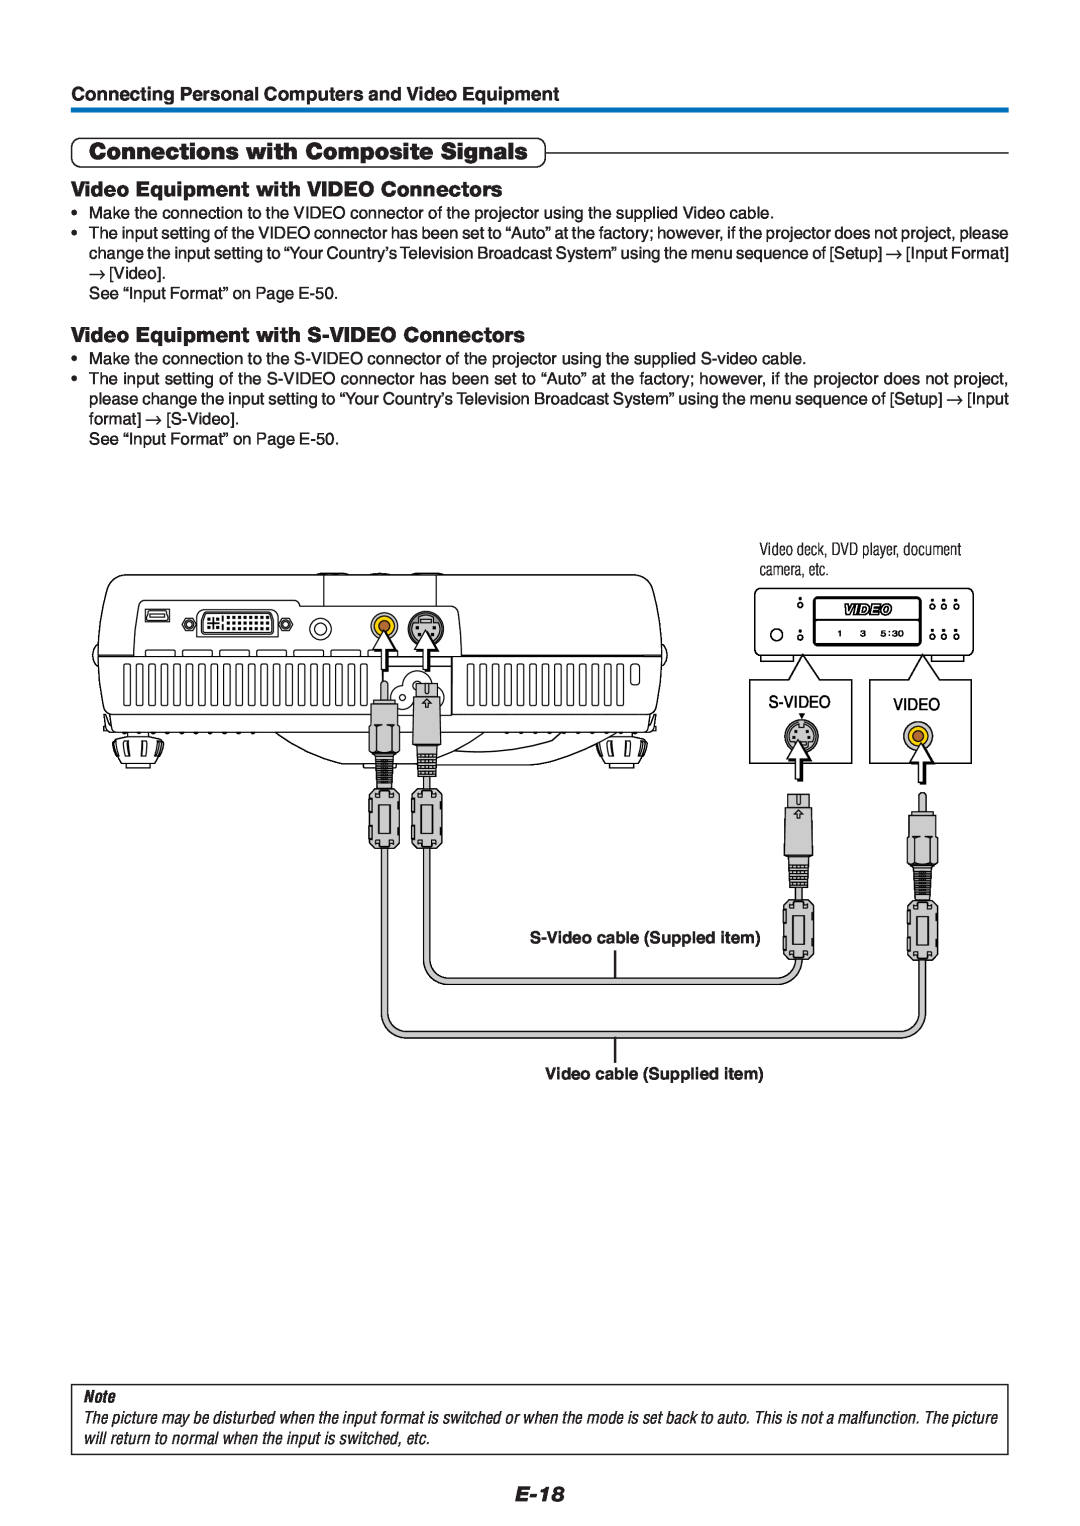 Mitsubishi Electronics XD60U user manual Connections with Composite Signals, Video Equipment with VIDEO Connectors, E-18 